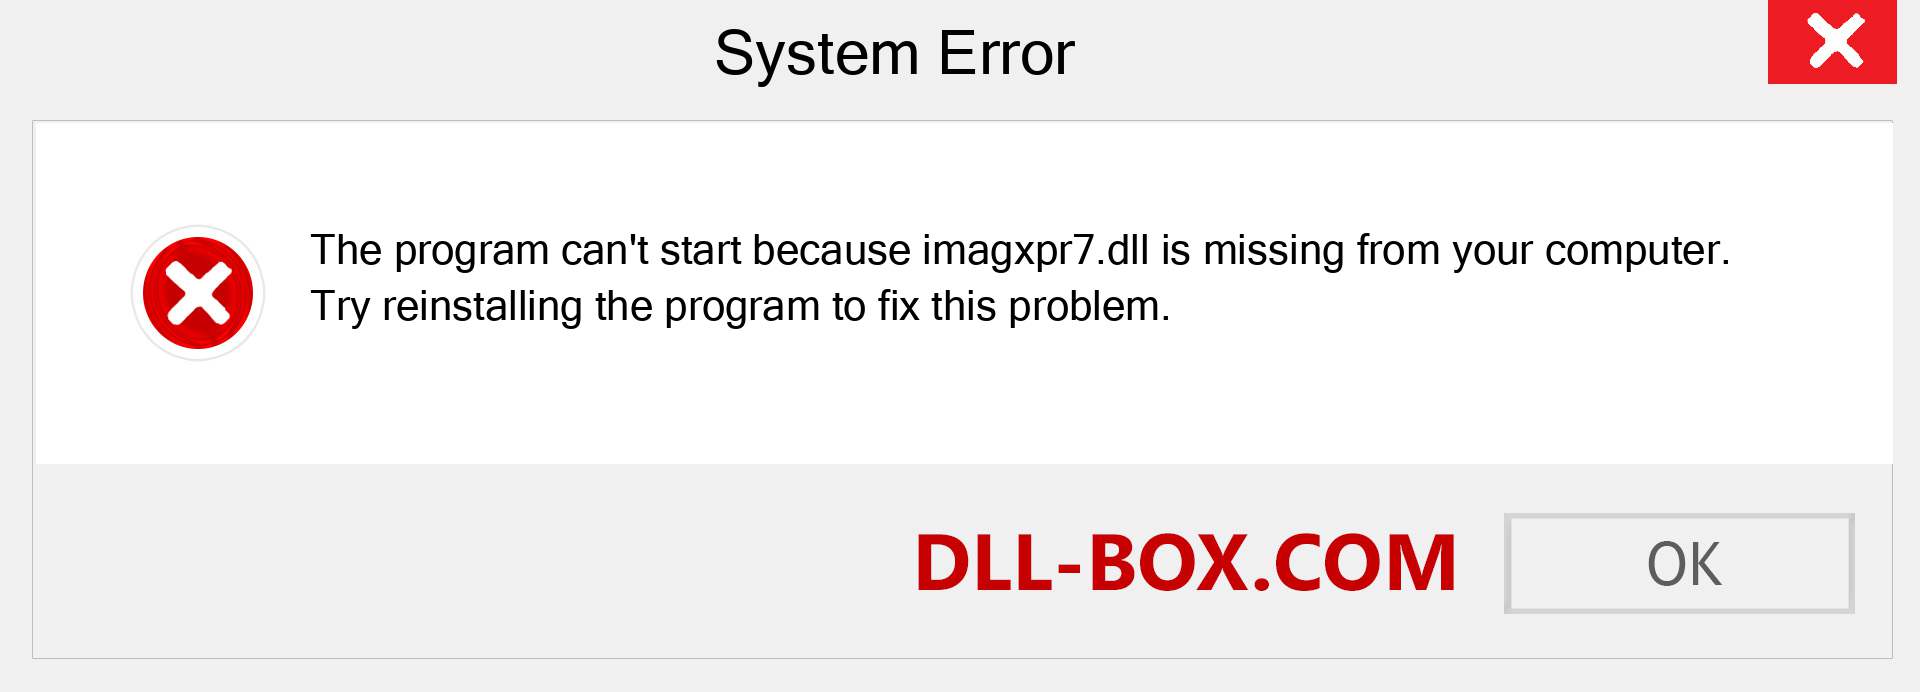  imagxpr7.dll file is missing?. Download for Windows 7, 8, 10 - Fix  imagxpr7 dll Missing Error on Windows, photos, images